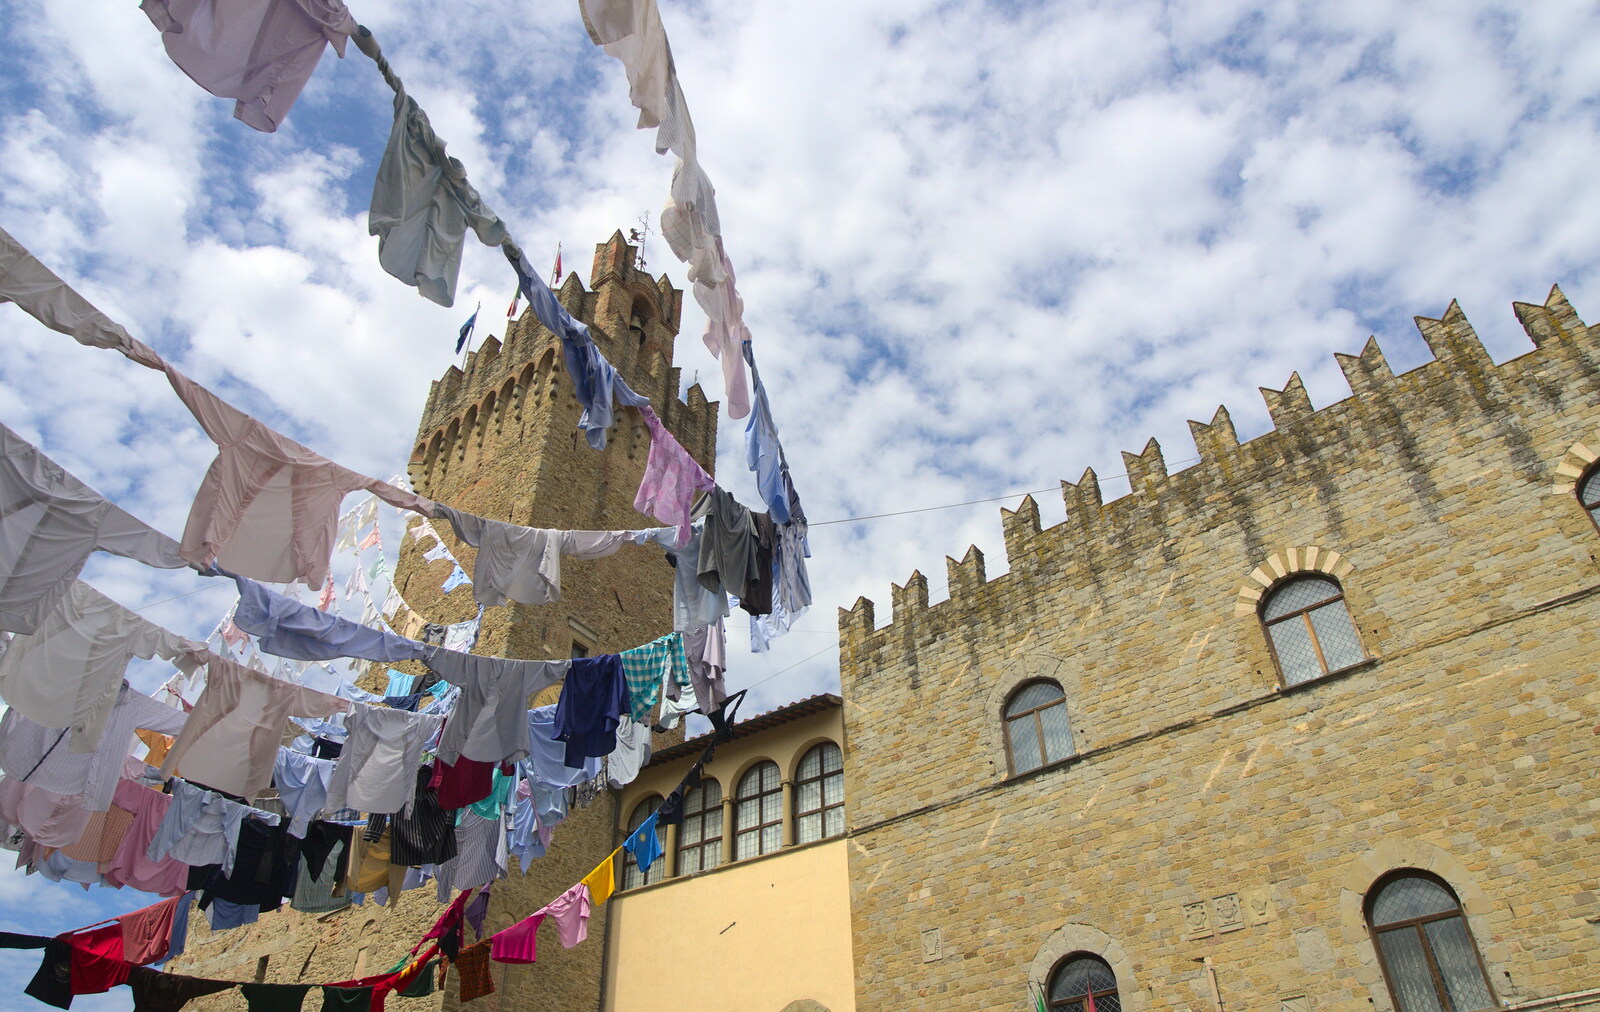 The washing-line art flaps in the breeze from Italian Weddings, Saracens and Swimming Pools, Arezzo, Tuscany - 12th June 2013